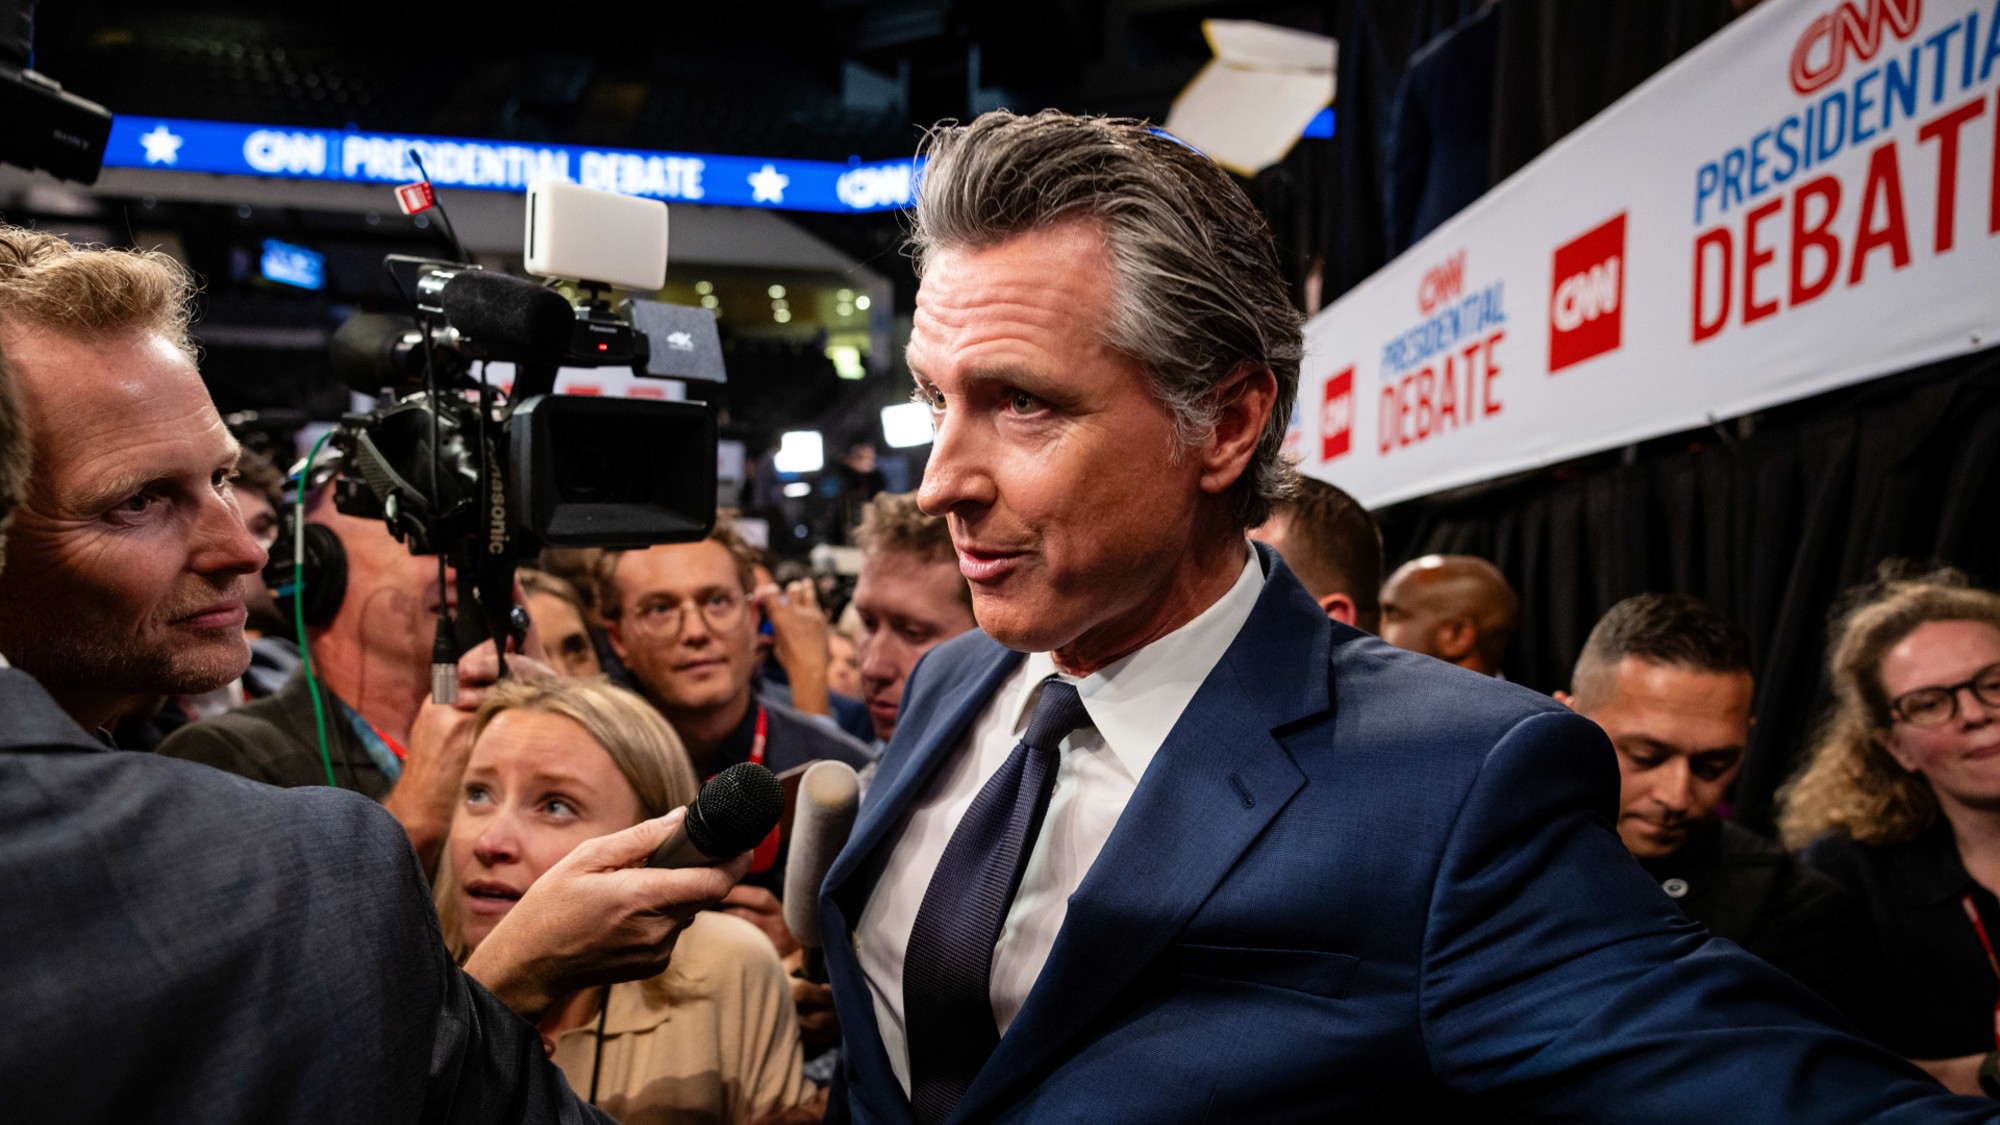 Gavin Newsom, the California governor who could enter the national stage